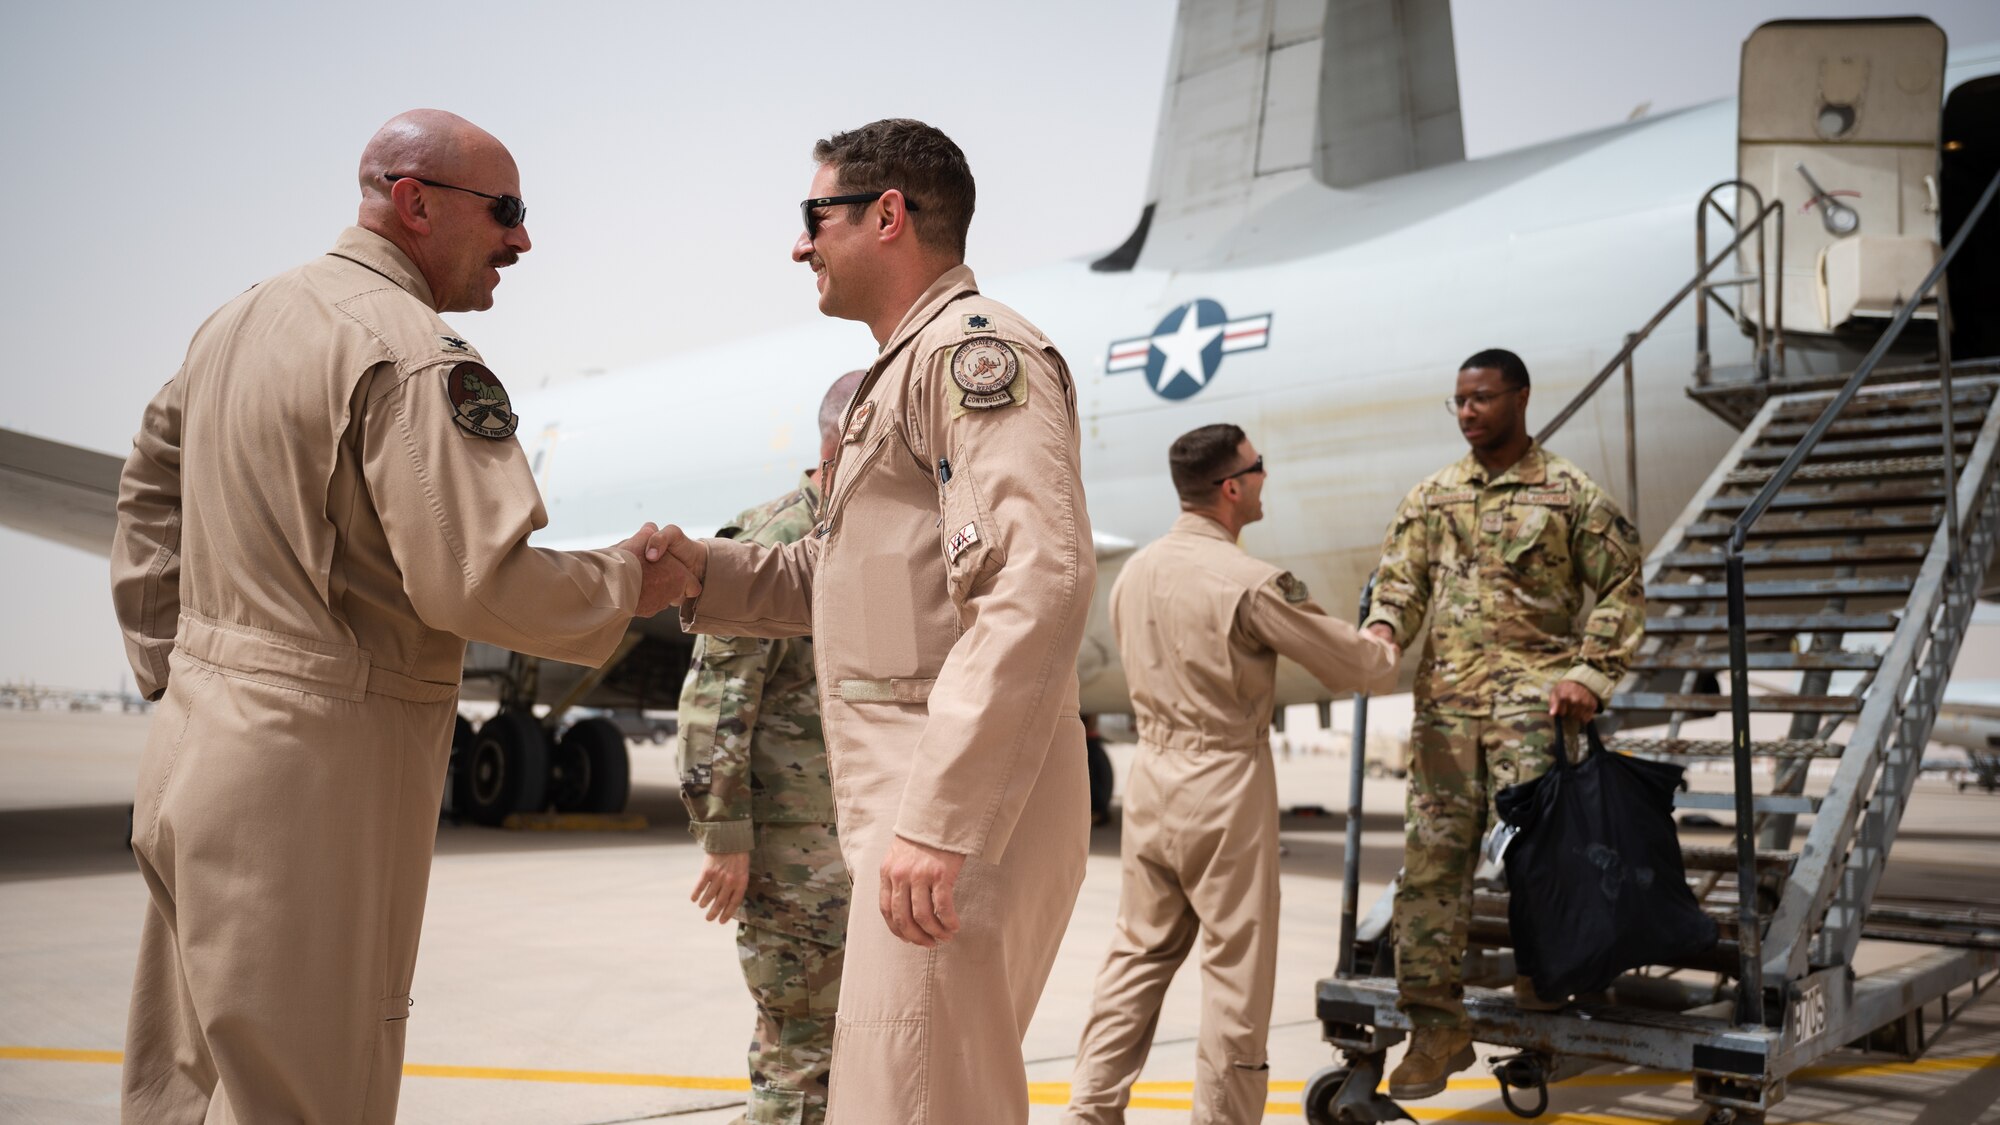 U.S. Air Force Col. Kevin Davidson, 378th Air Expeditionary Wing vice commander, greets U.S. Air Force Lt. Col. Steven Bailey, 968th Expeditionary Airborne Air Control Squadron commander, at Prince Sultan Air Base, Kingdom of Saudi Arabia, March 6, 2022. Previously stationed at Al Dhafra Air Base, United Arab Emirates, the 968th EAACS will now begin operating from PSAB. (U.S. Air Force photo by Senior Airman Jacob B. Wrightsman)